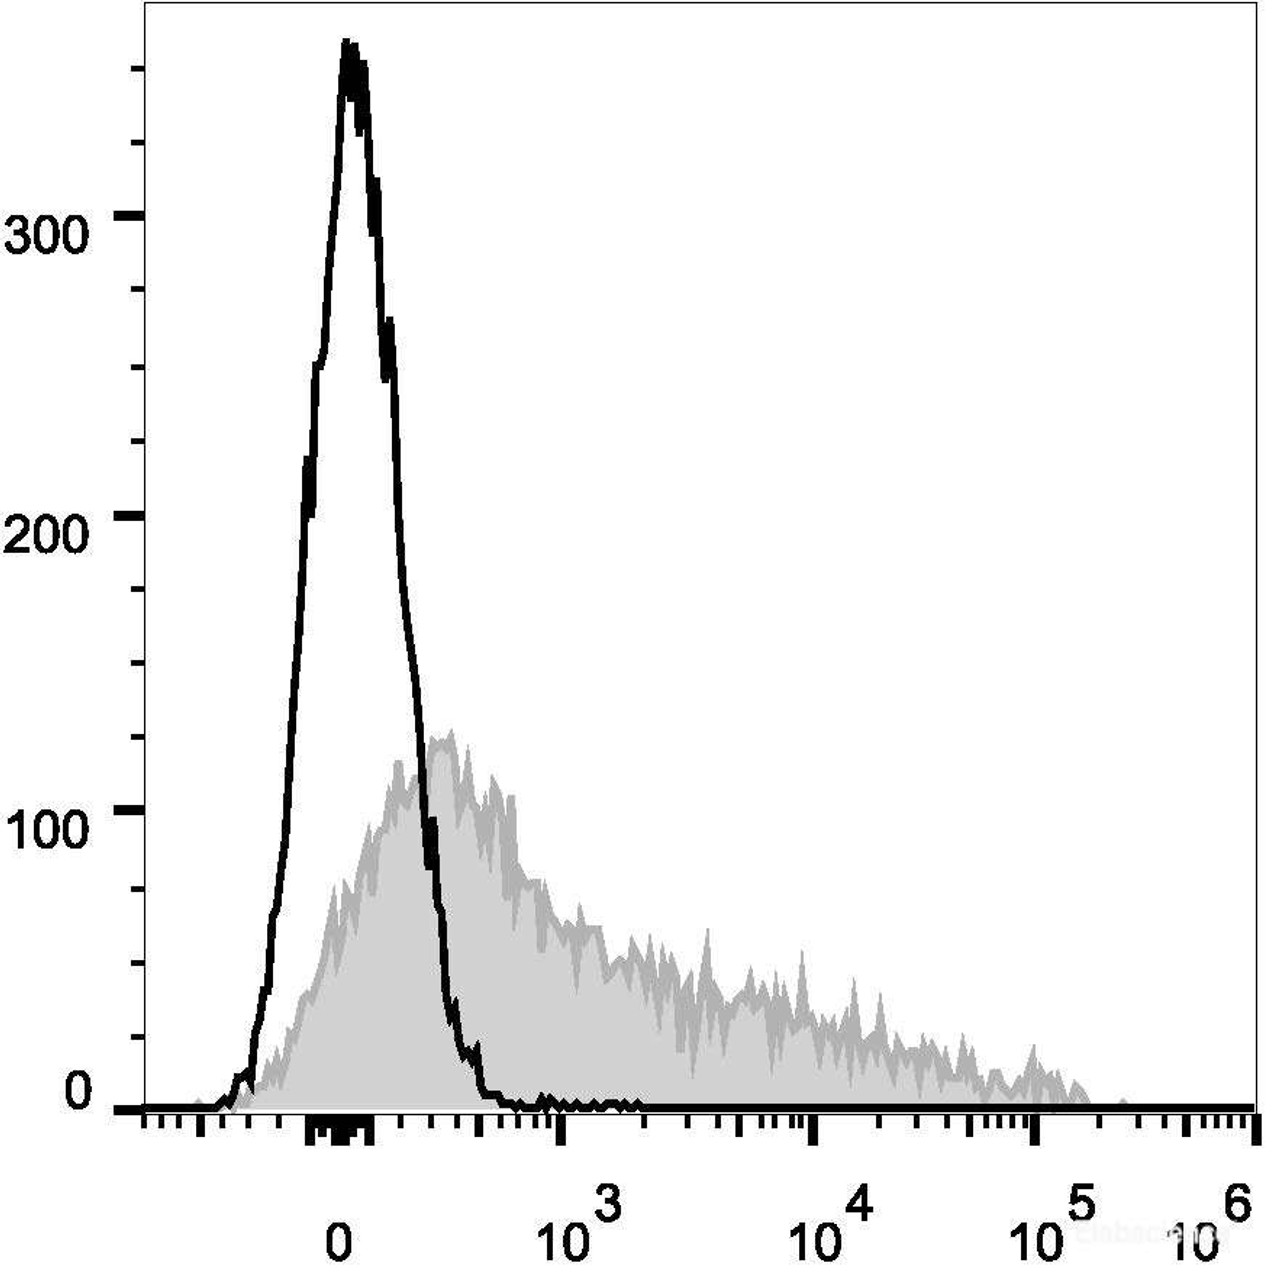 C57BL/6 murine bone marrow cells are stained with AF647 Anti-Mouse CD16 Antibody[Used at .2 μg/1<sup>6</sup> cells dilution](filled gray histogram). Unstained bone marrow cells (empty black histogram) are used as control.